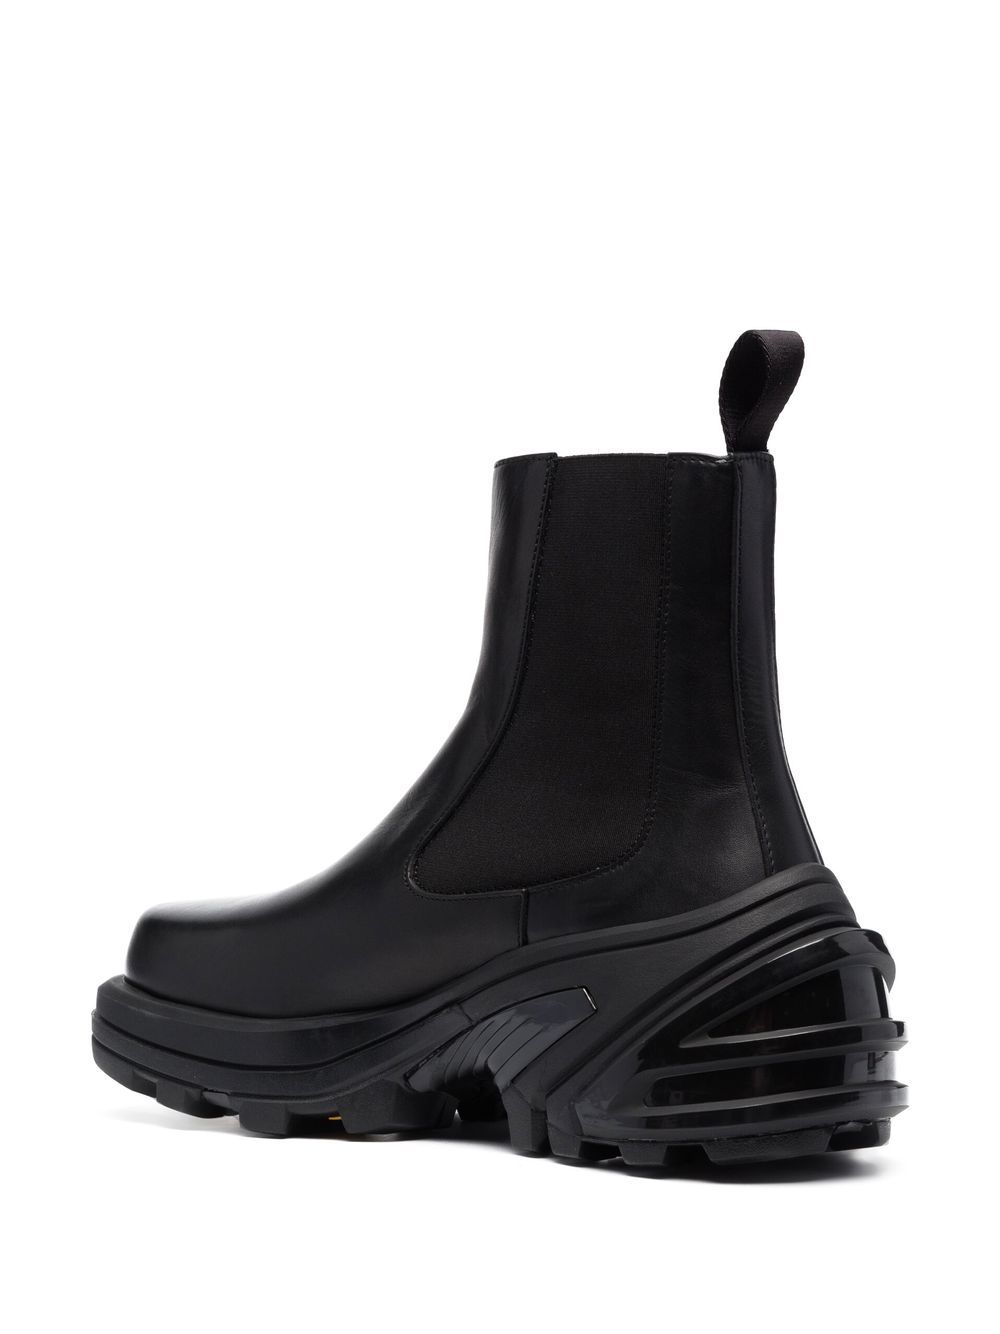 1017 ALYX 9SM chunky-sole Leather Boots - Farfetch